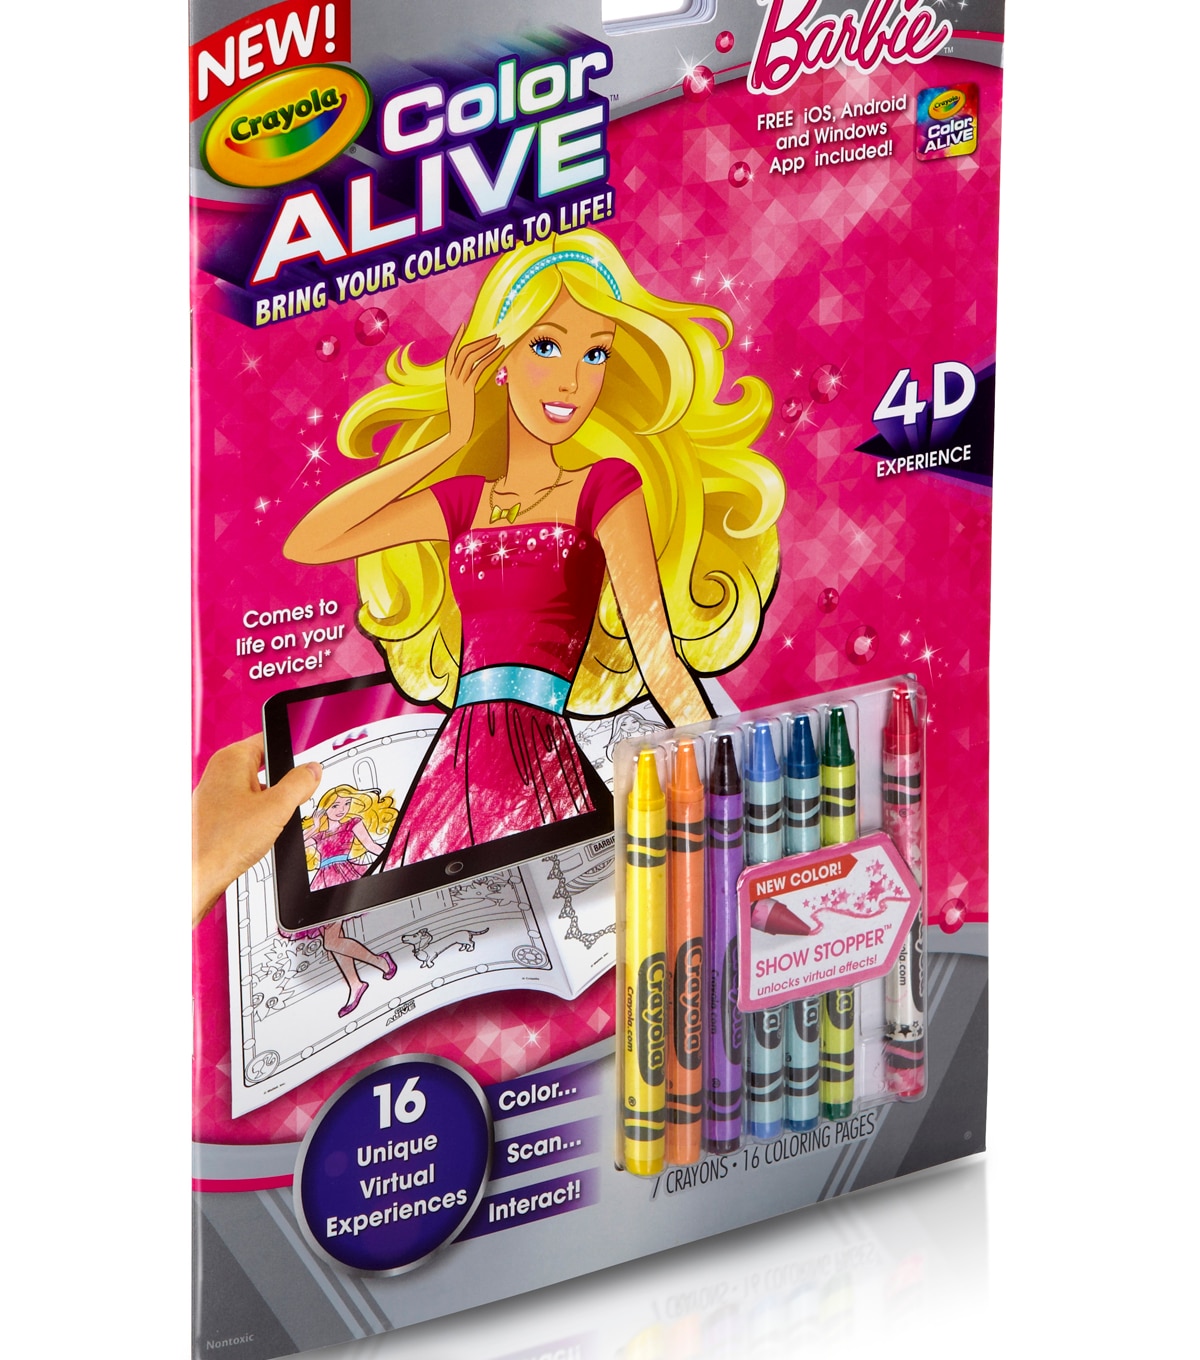 Crayola Color Alive Action Coloring Pages Barbie Joann Life